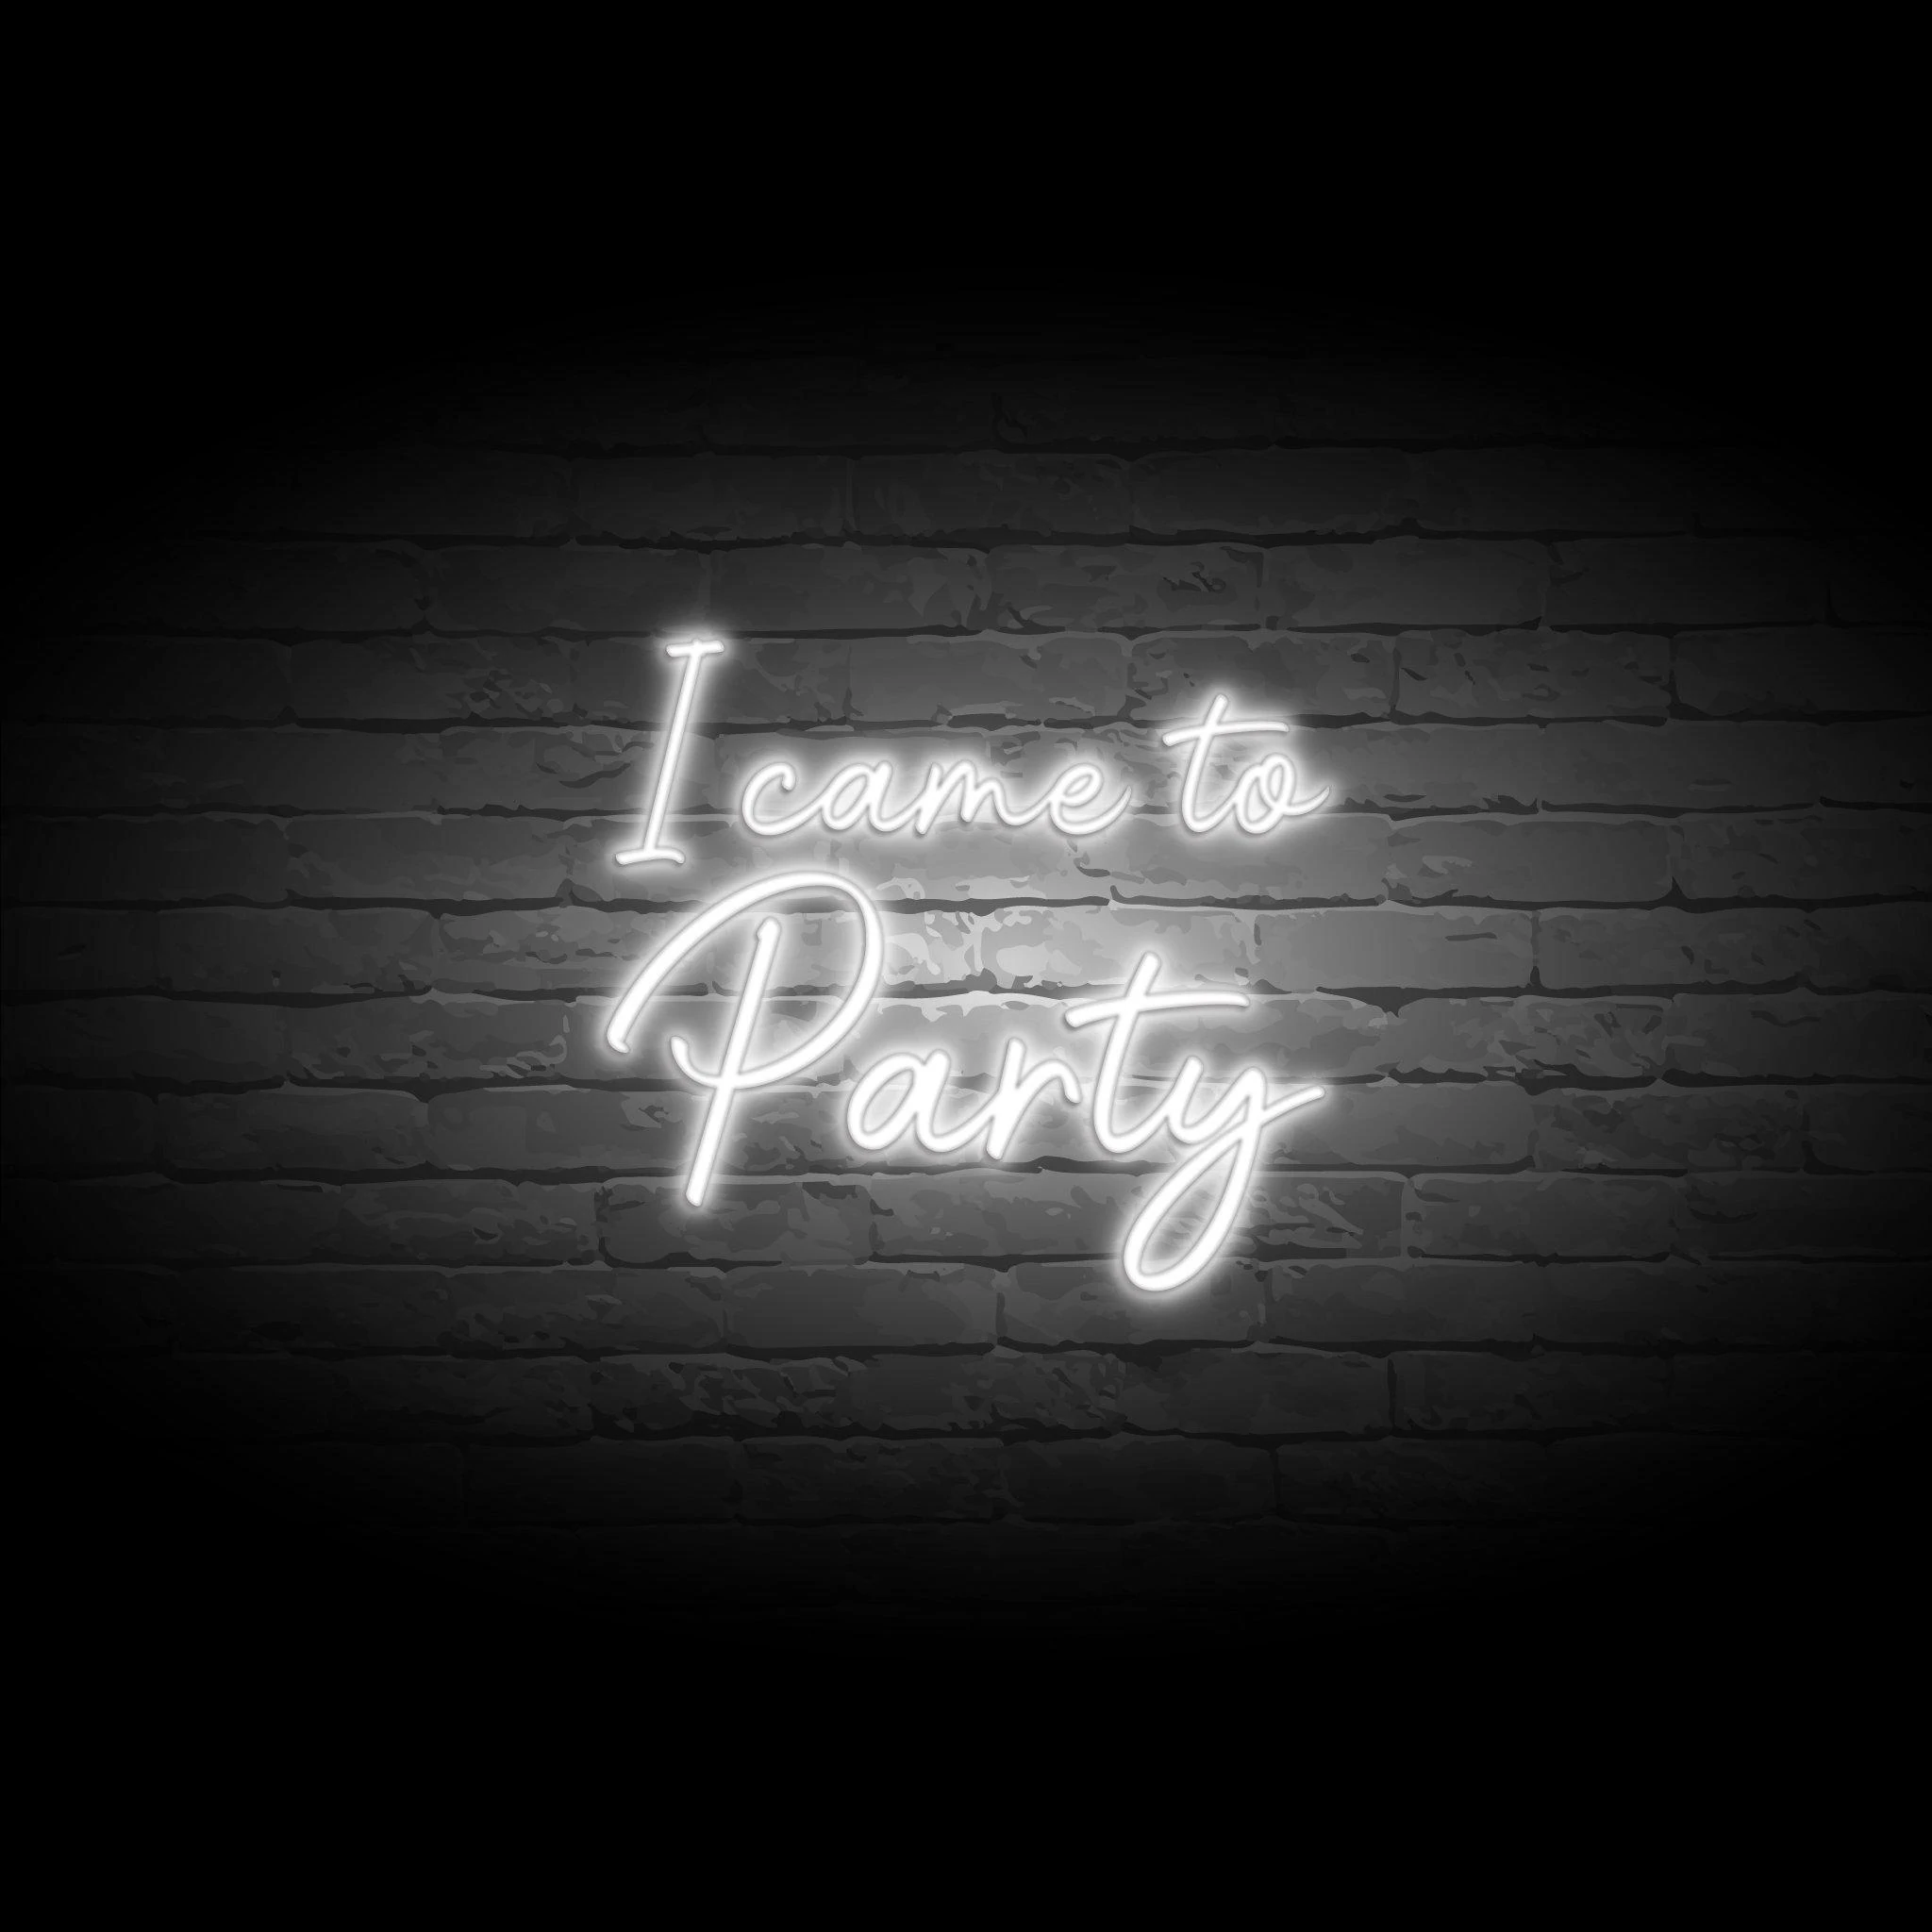 'I CAME TO PARTY' NEON SIGN - NeonFerry